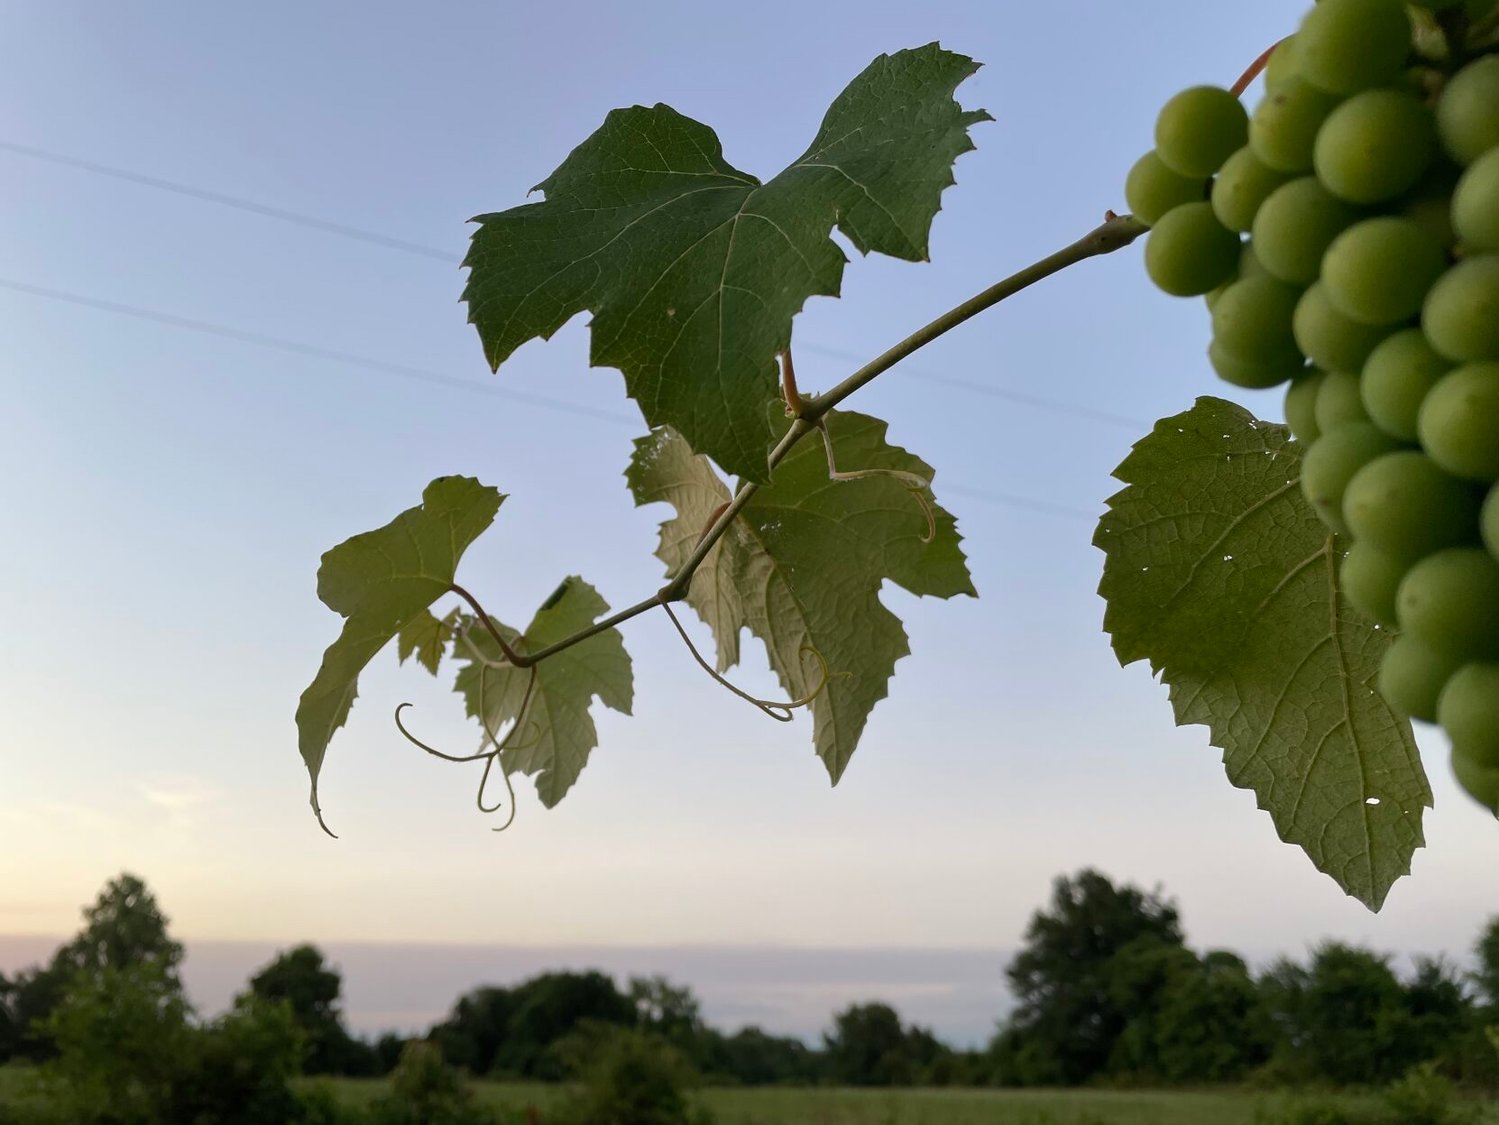 Lisa Hickman shared this closeup photo of a growing grapevine on a picturesque Polk County summer evening.